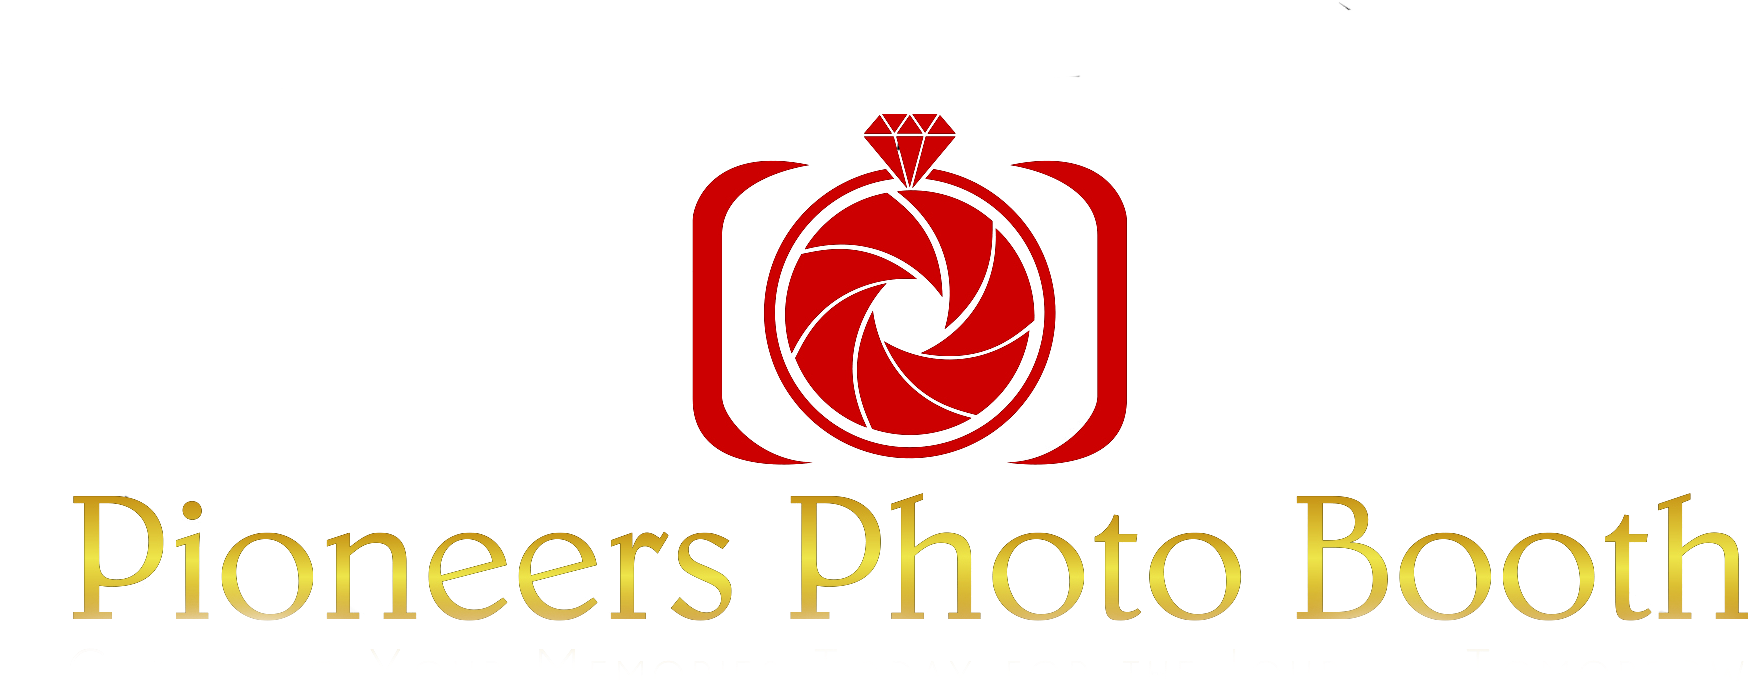 Pioneers Photo Booth Logo